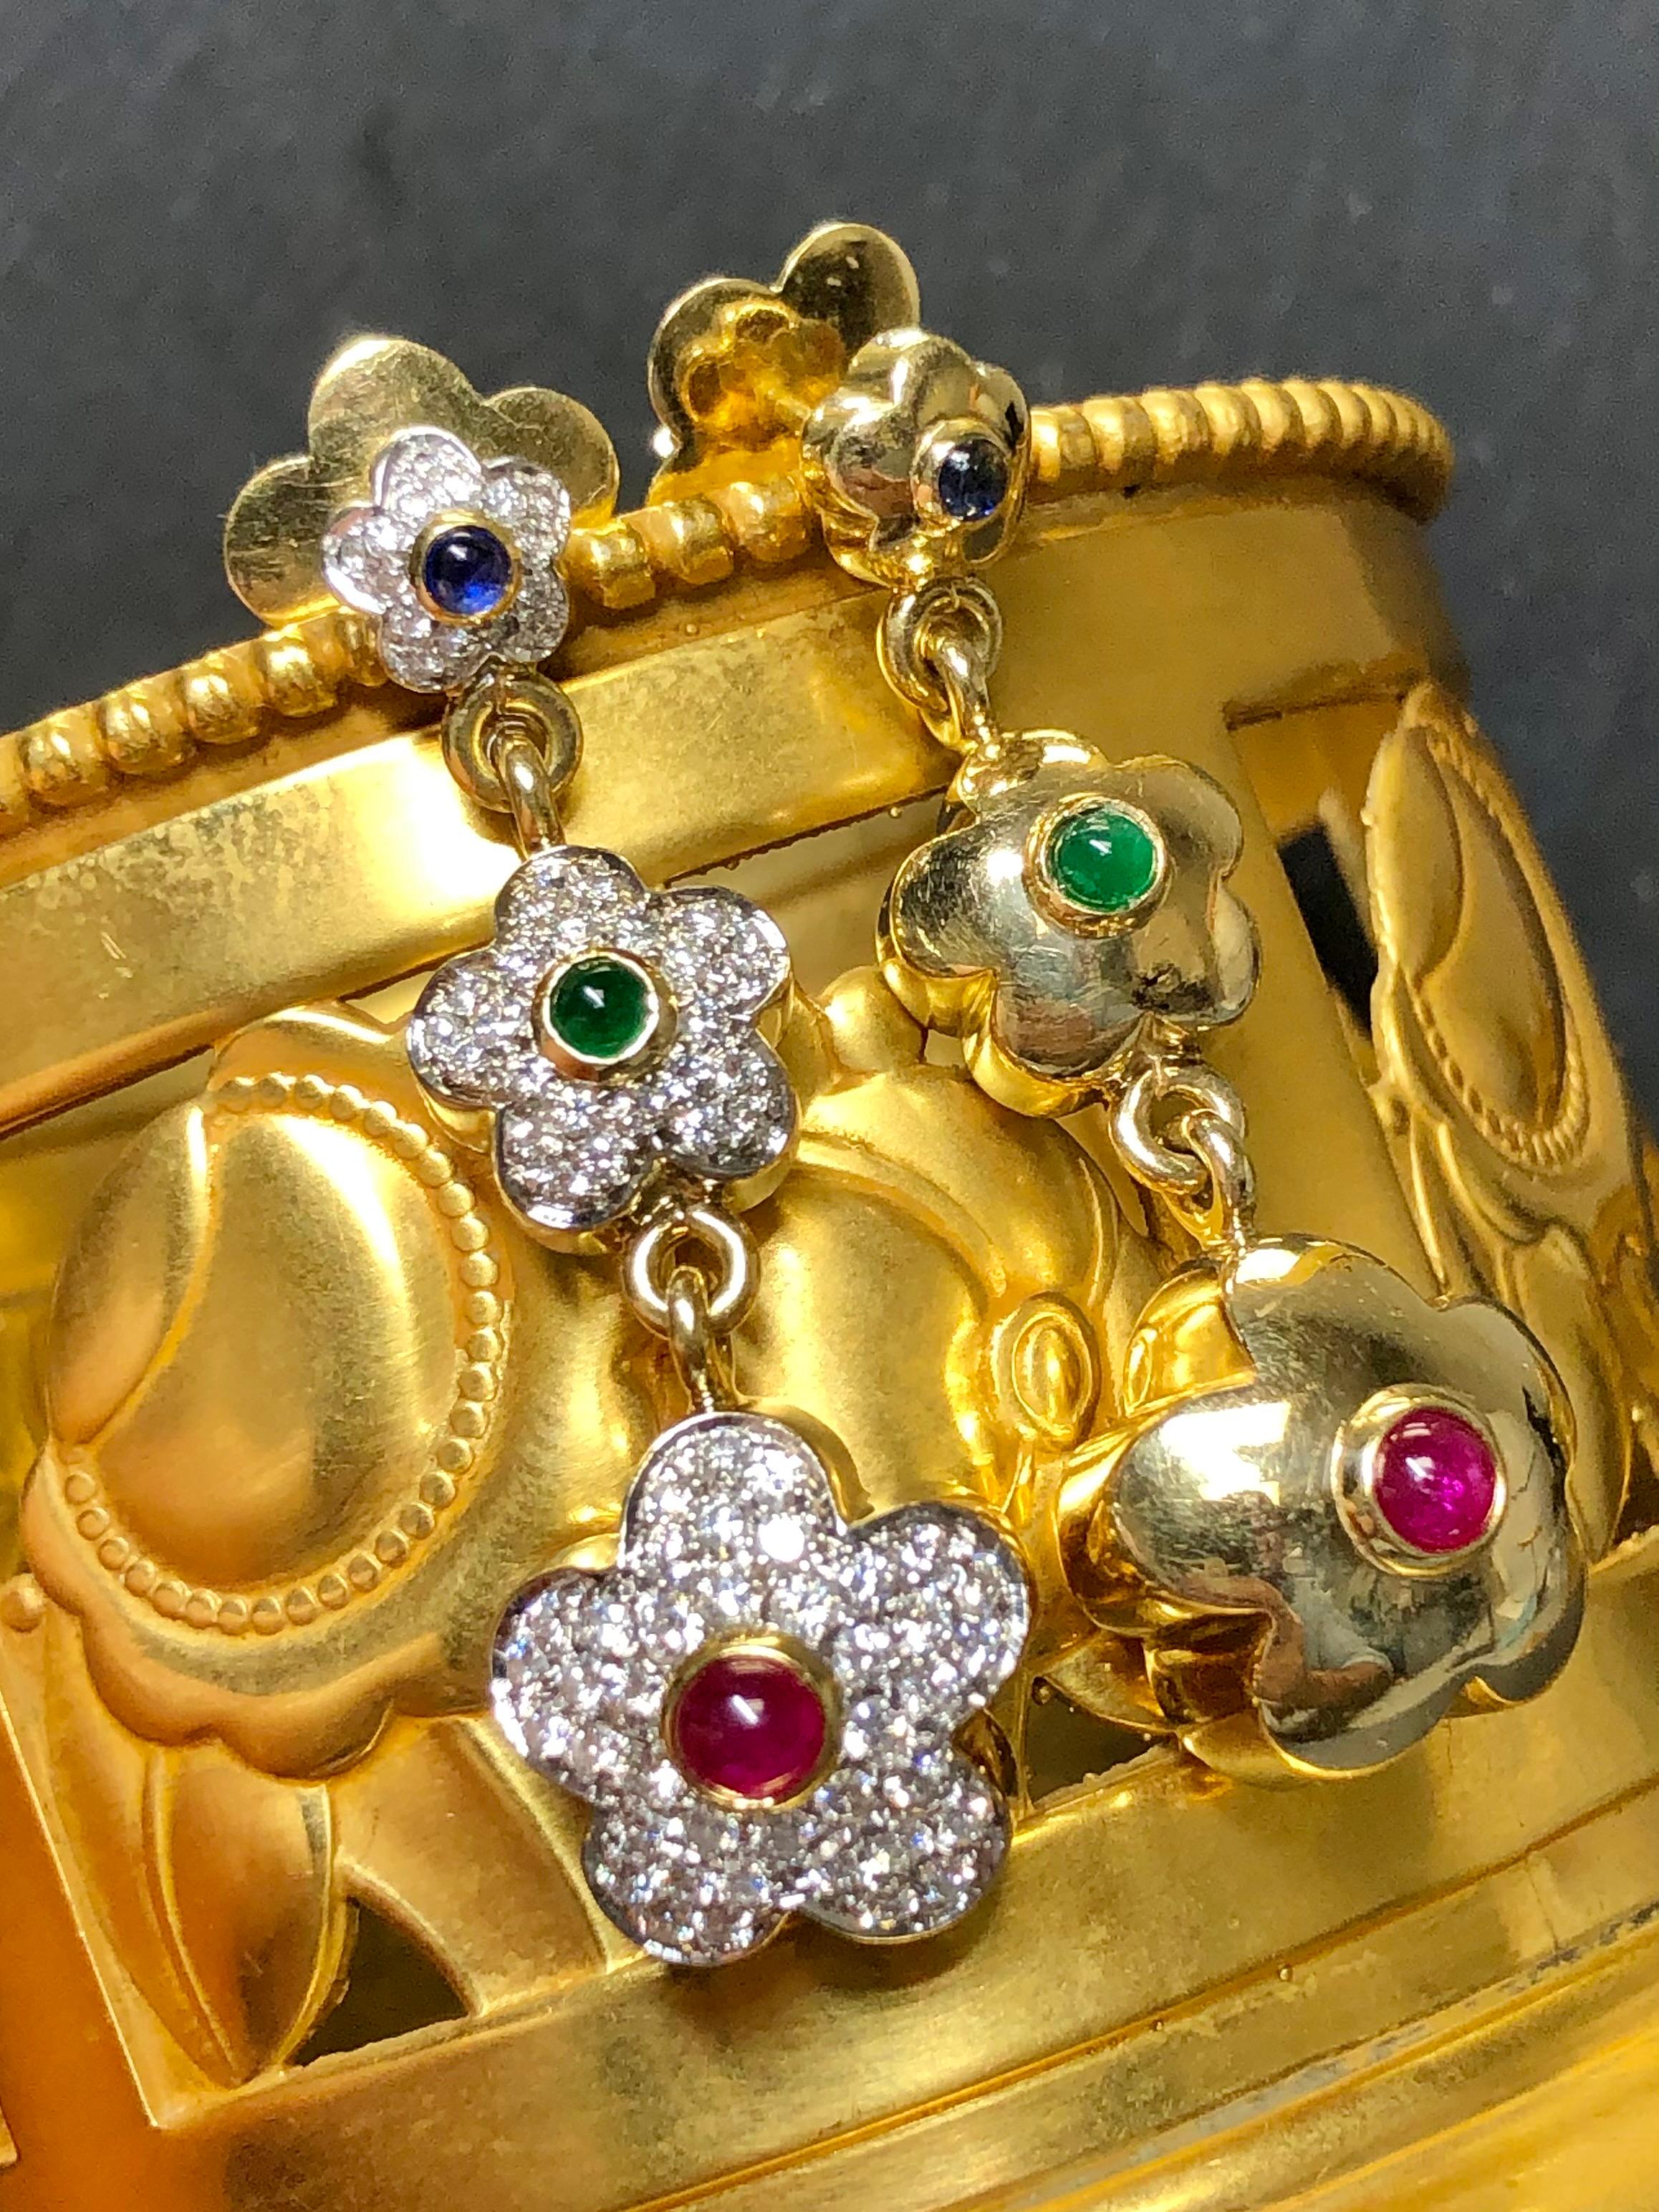 
A gorgeous pair of Pasquale Bruni earrings that just sing designer! They are crafted in 18K yellow gold and pave set with approximately 1.23cttw in F-G color Vs1 clarity round diamonds as well as cabochon rubies, emeralds and sapphires. Earrings